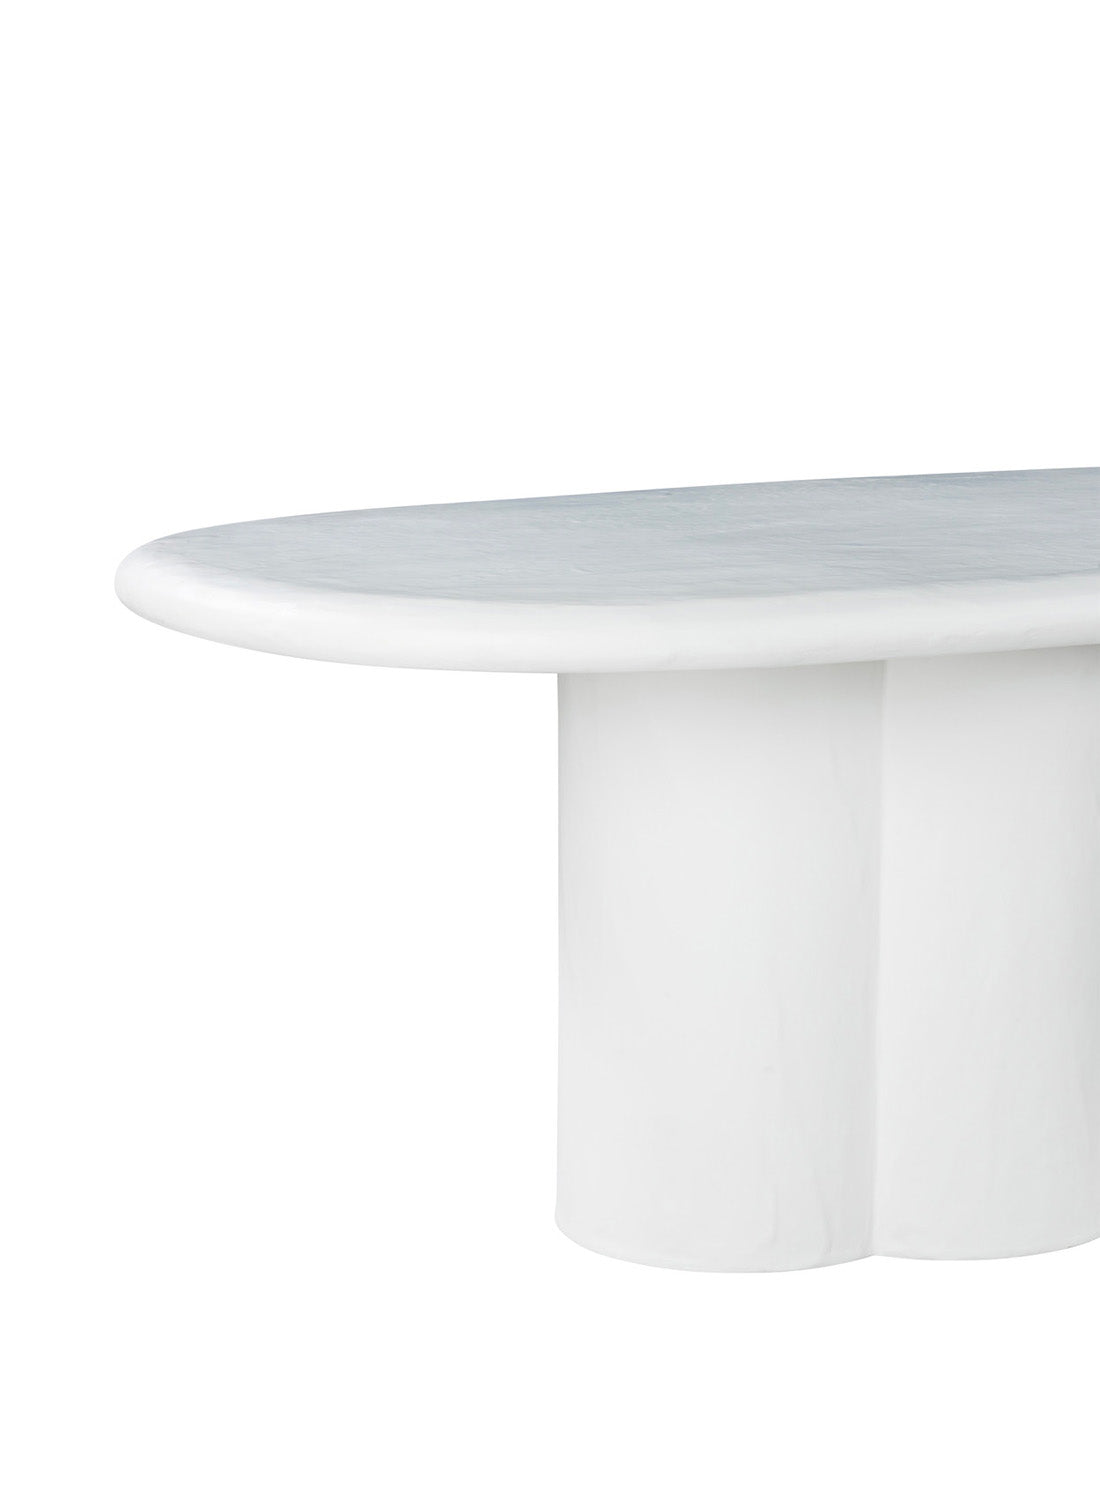 Avery Oval Dining Table, White